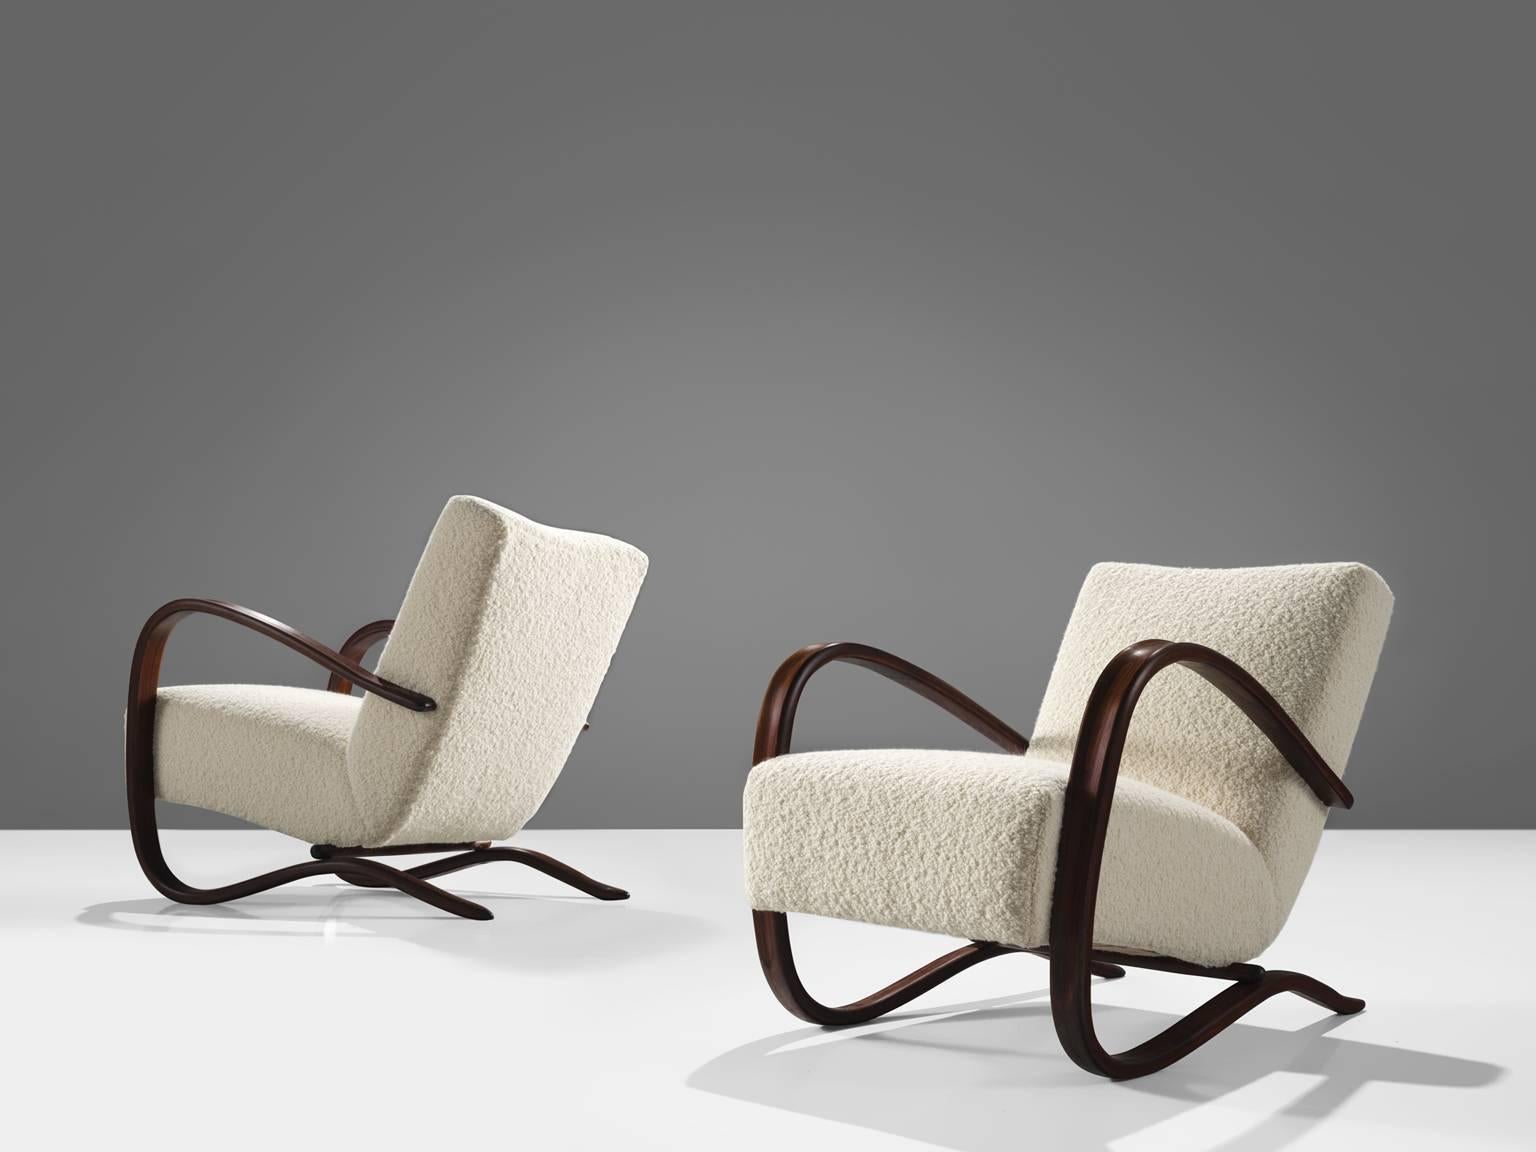 Jindřich Halabala, customizable lounge chairs, wood, Pierre Frey fabric, Czech Republic, 1930s  

Extraordinary easy chairs with Pierre Frey fabric upholstery. These chairs have a very dynamic and abundant appearance. Beautifully curved armrests in